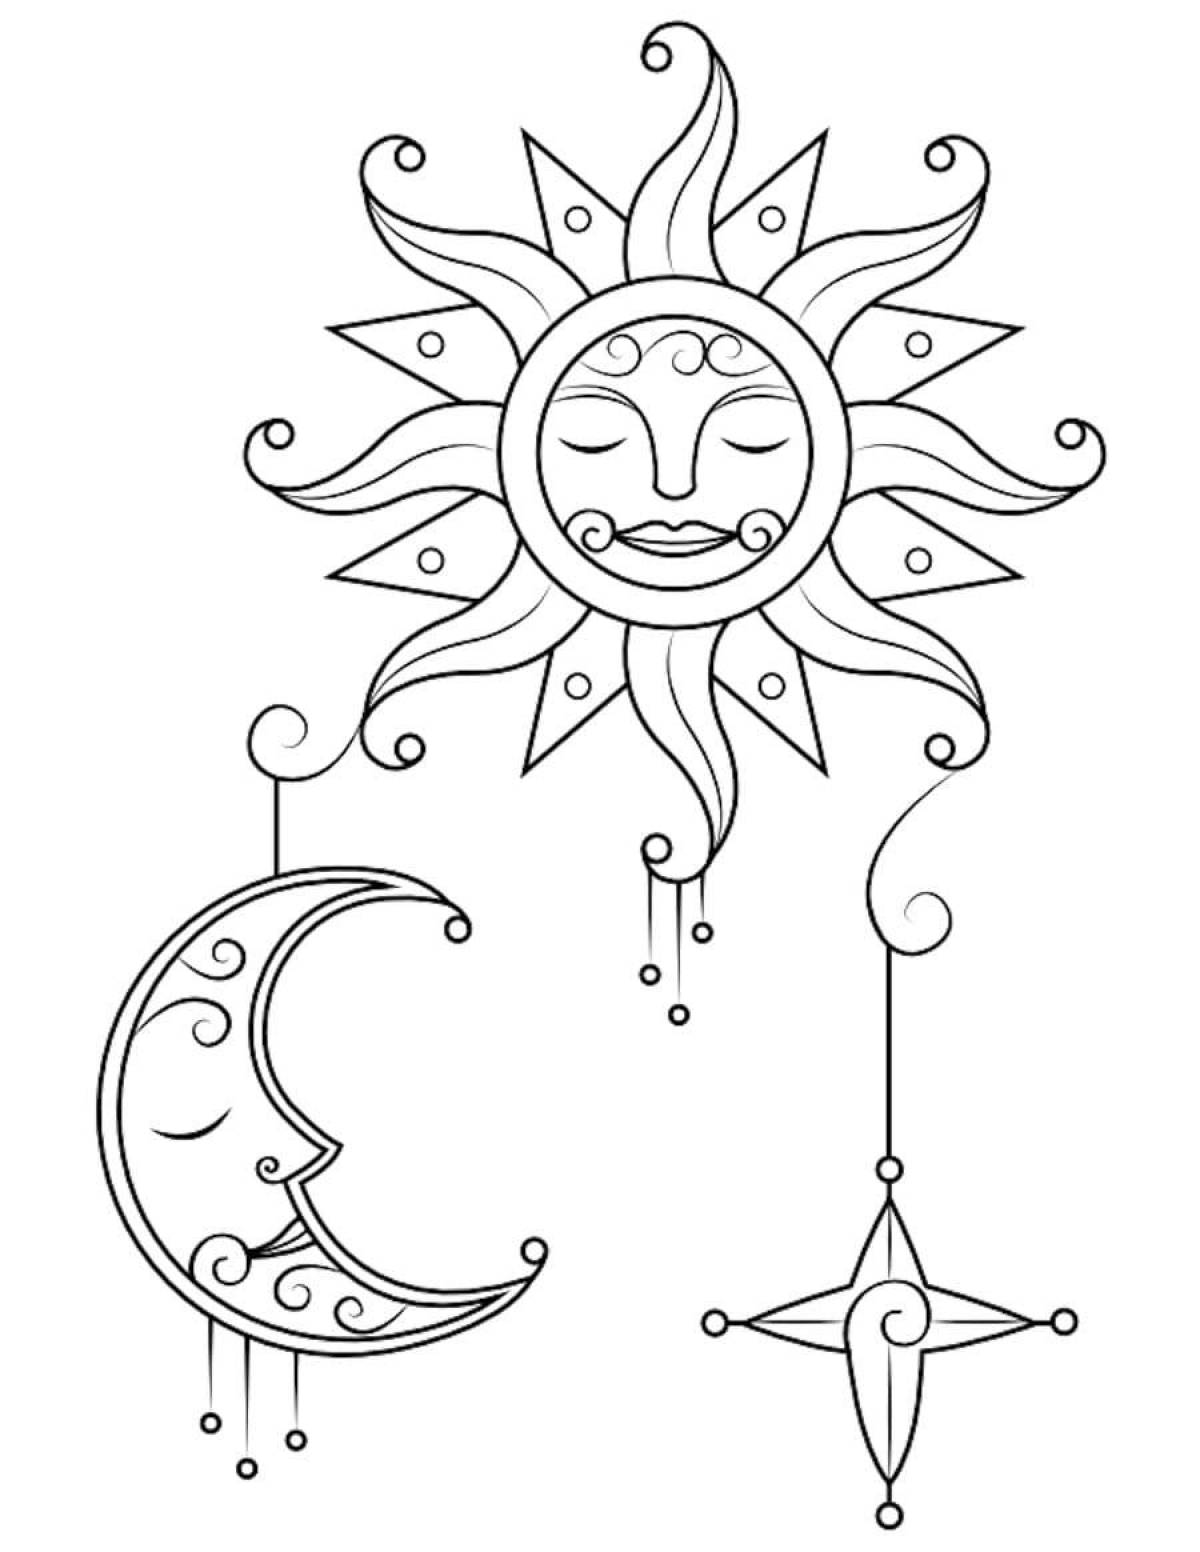 Rampant sun and moon coloring page